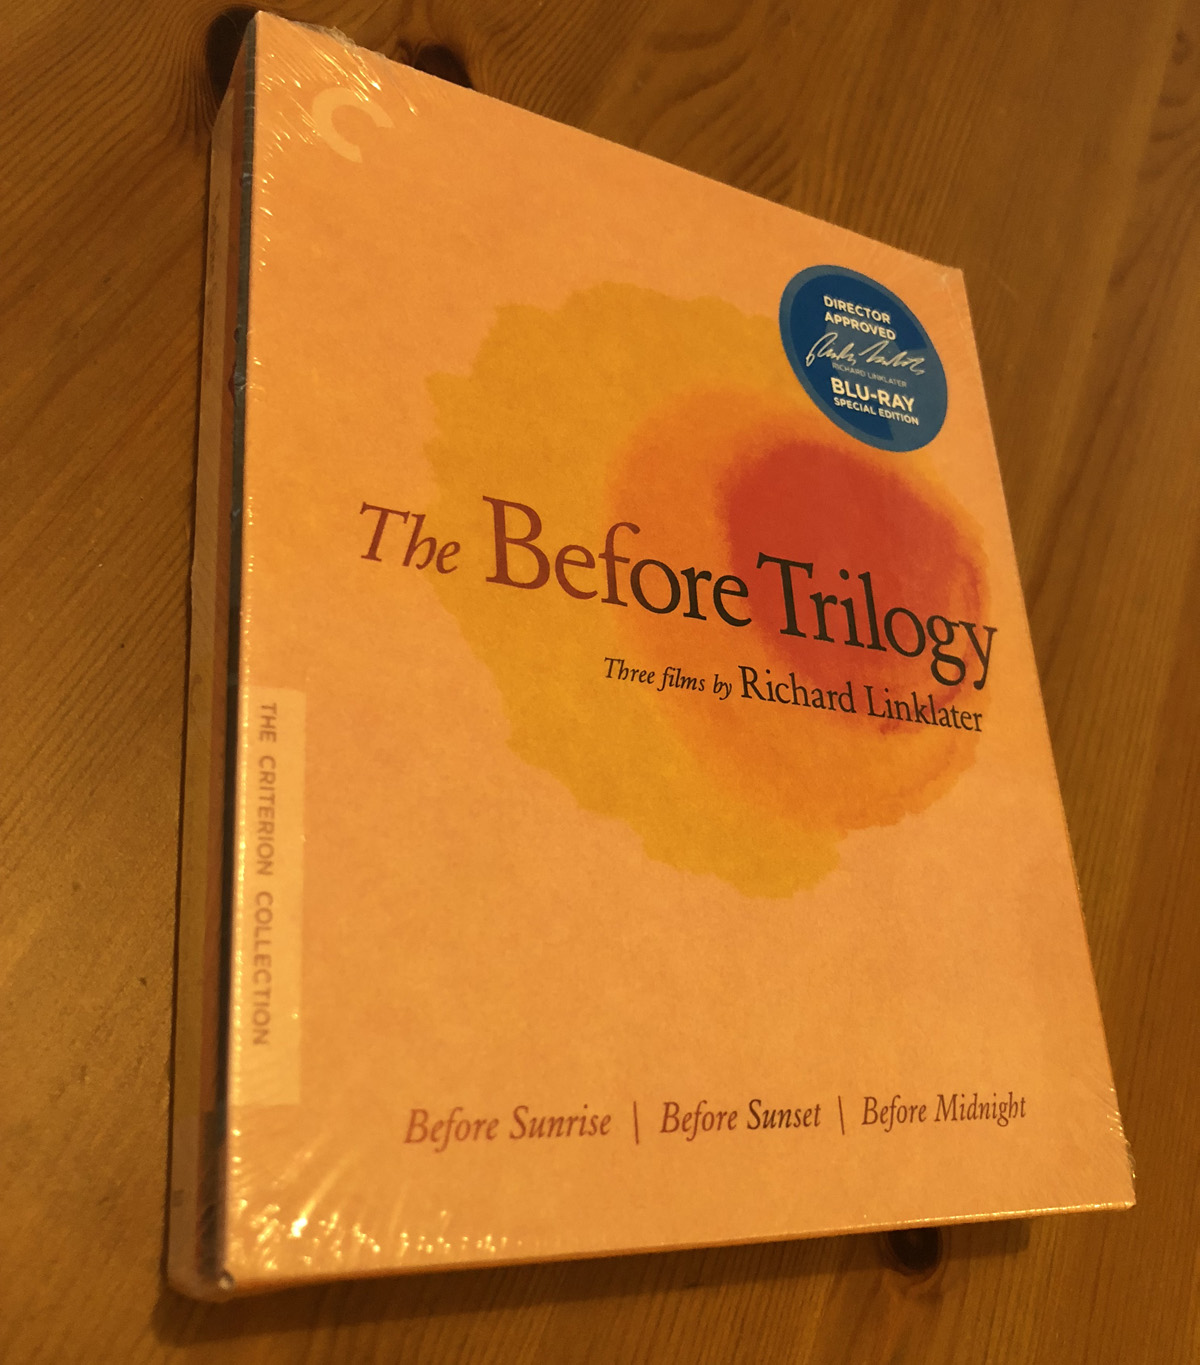 The Before Trilogy (Criterion Collection Box Set)